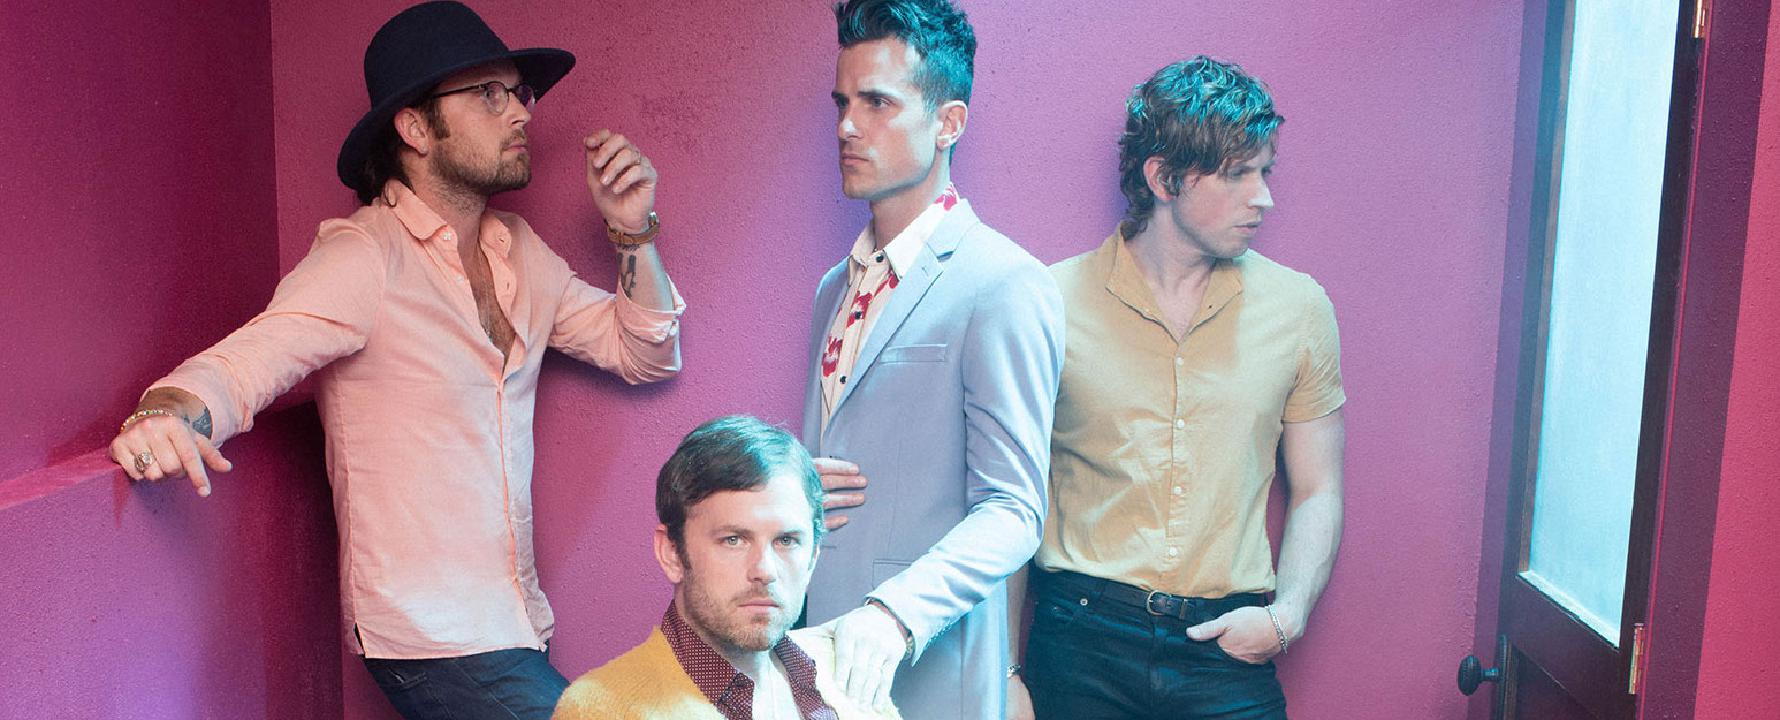 Promotional photograph of Kings of Leon.